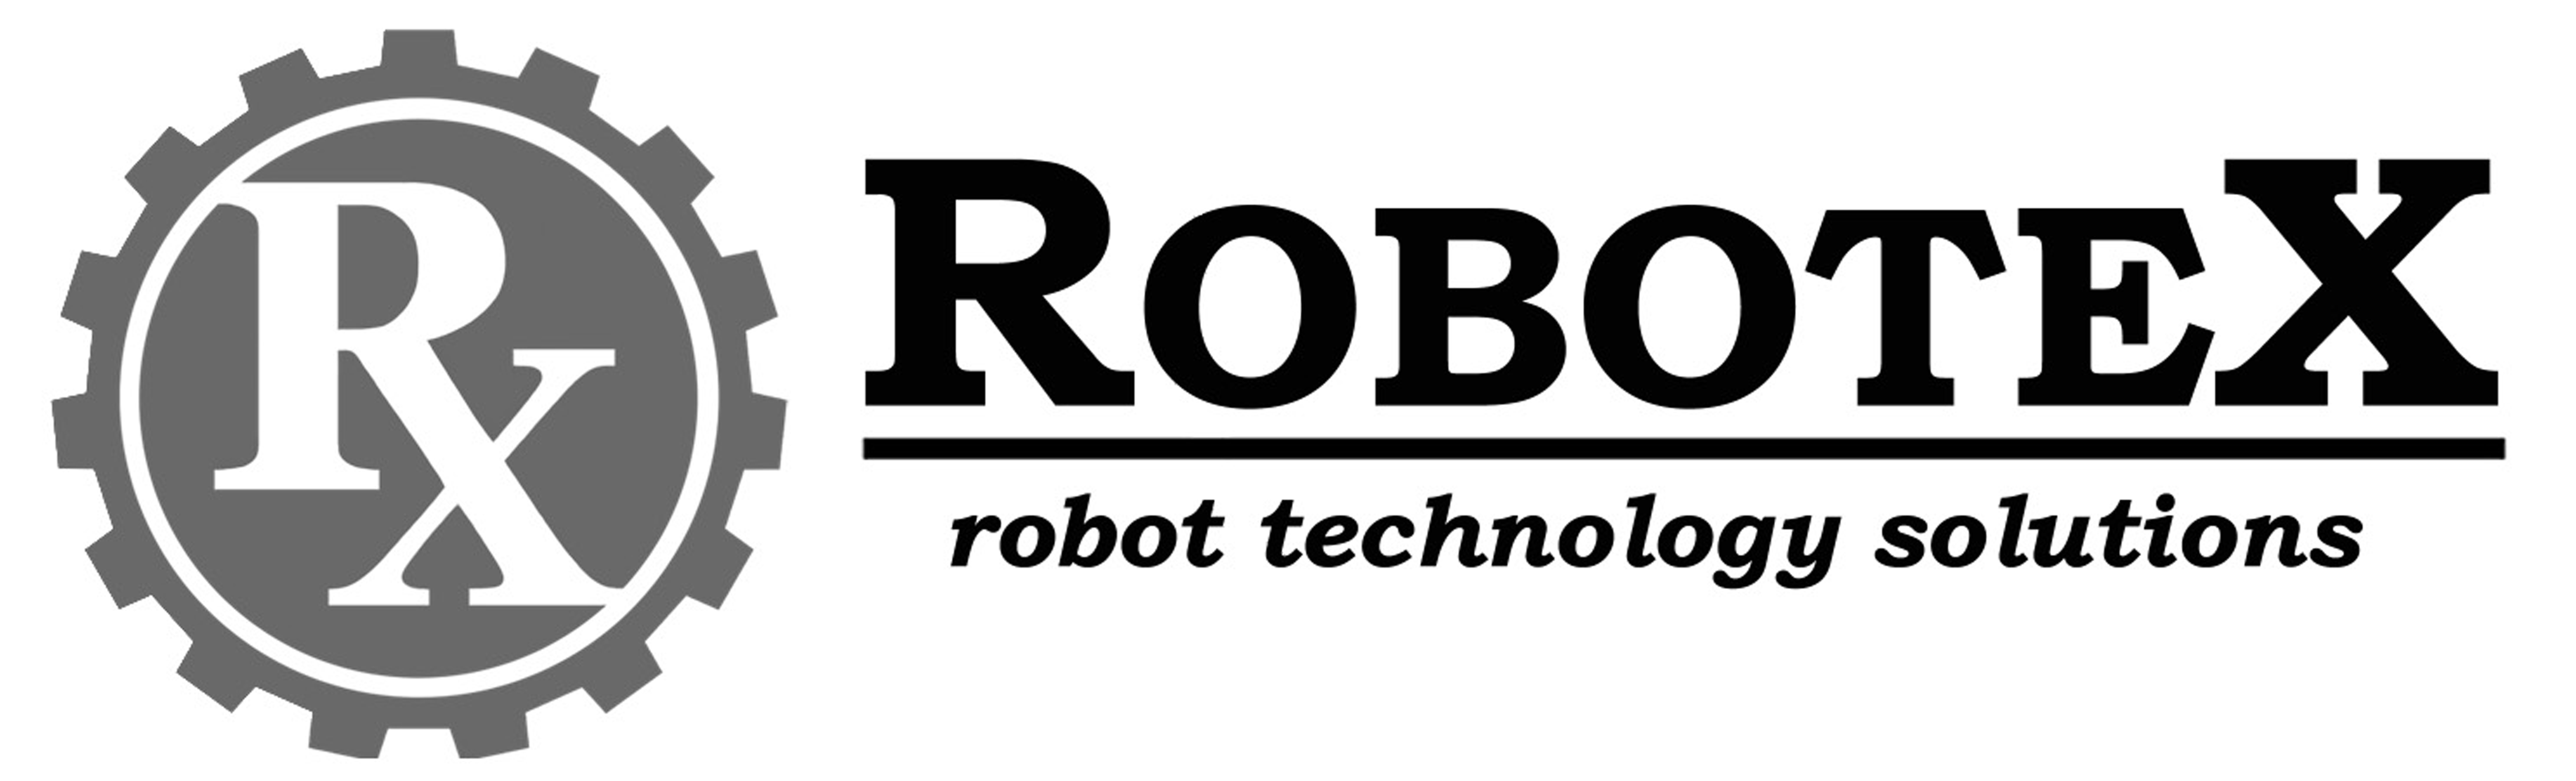 Amazing Robotex Pictures & Backgrounds